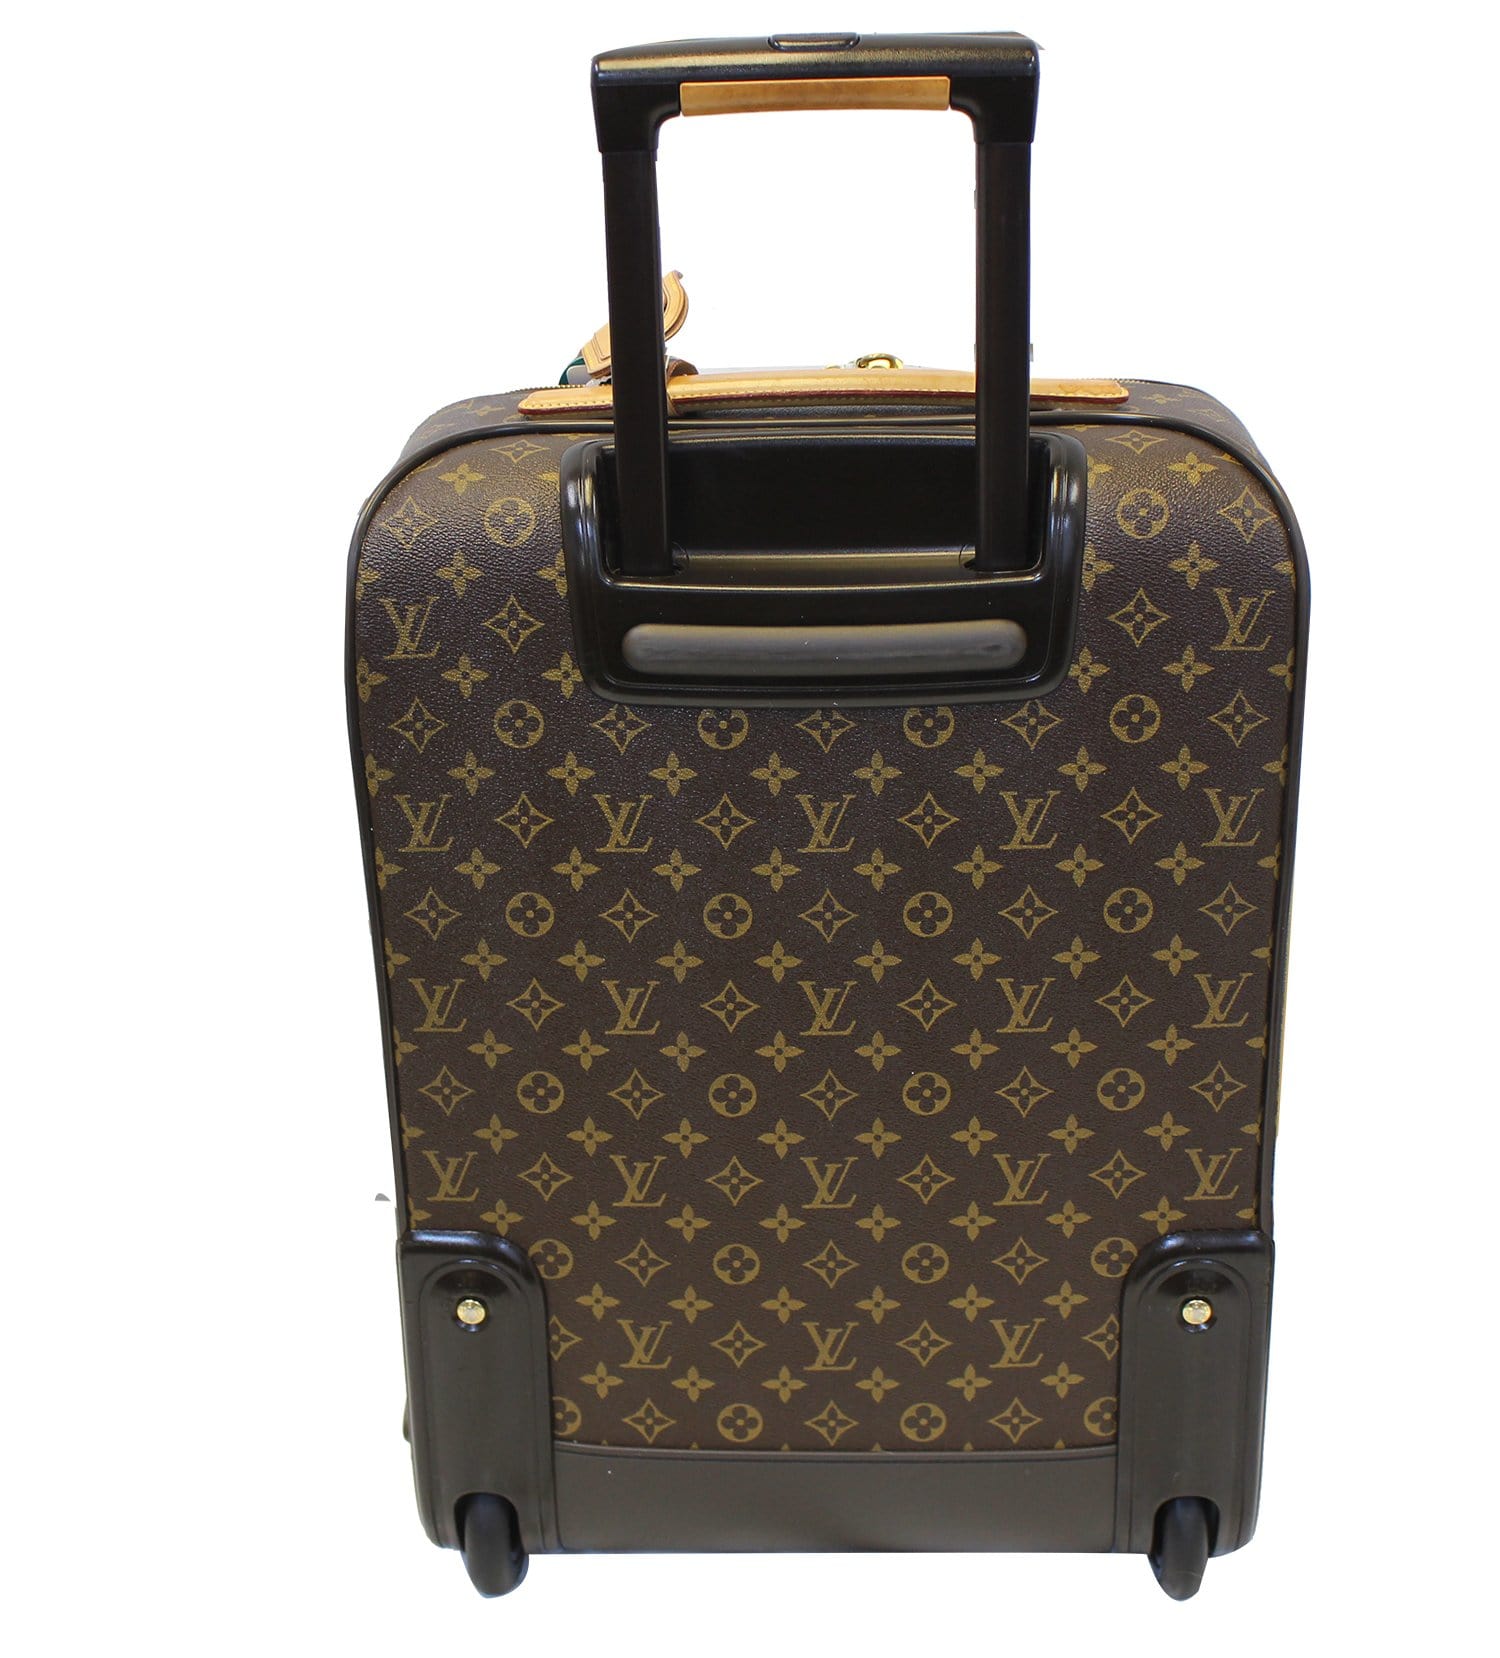 louis vuitton carry on luggage cover